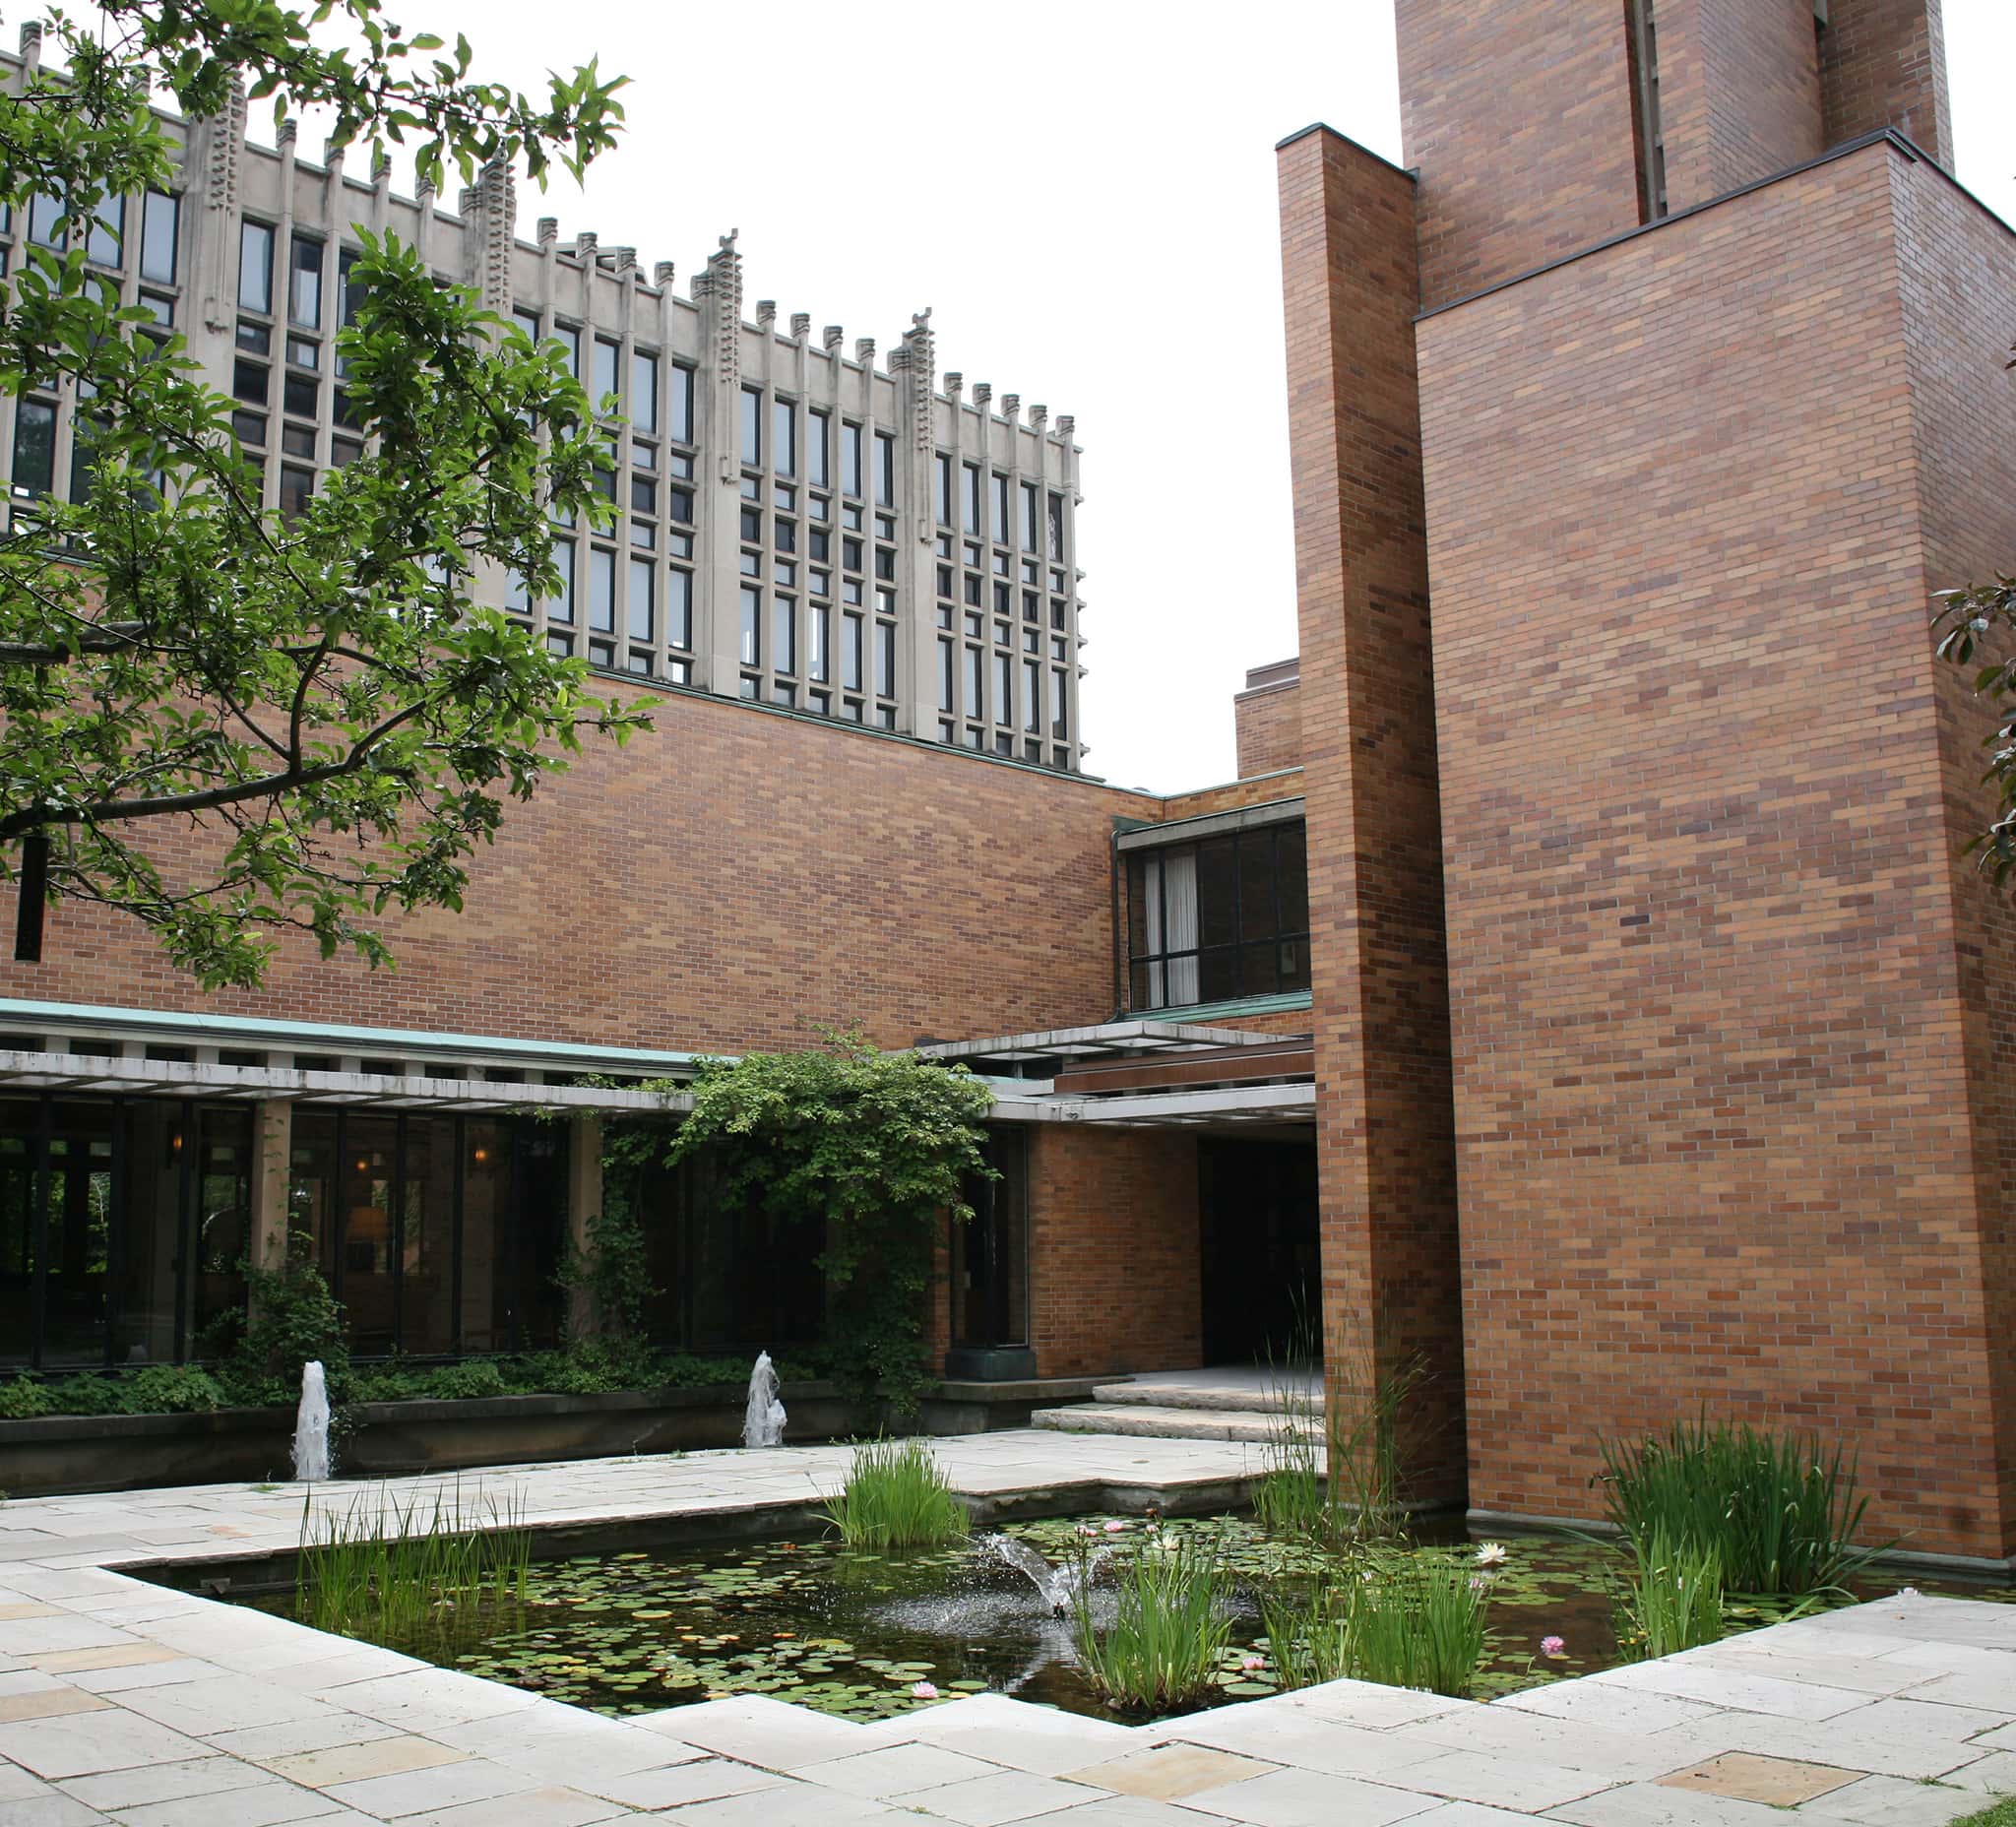 In the courtyard of Massey College, paving surrounds a quiet pond with water plants and a tiny fountain.